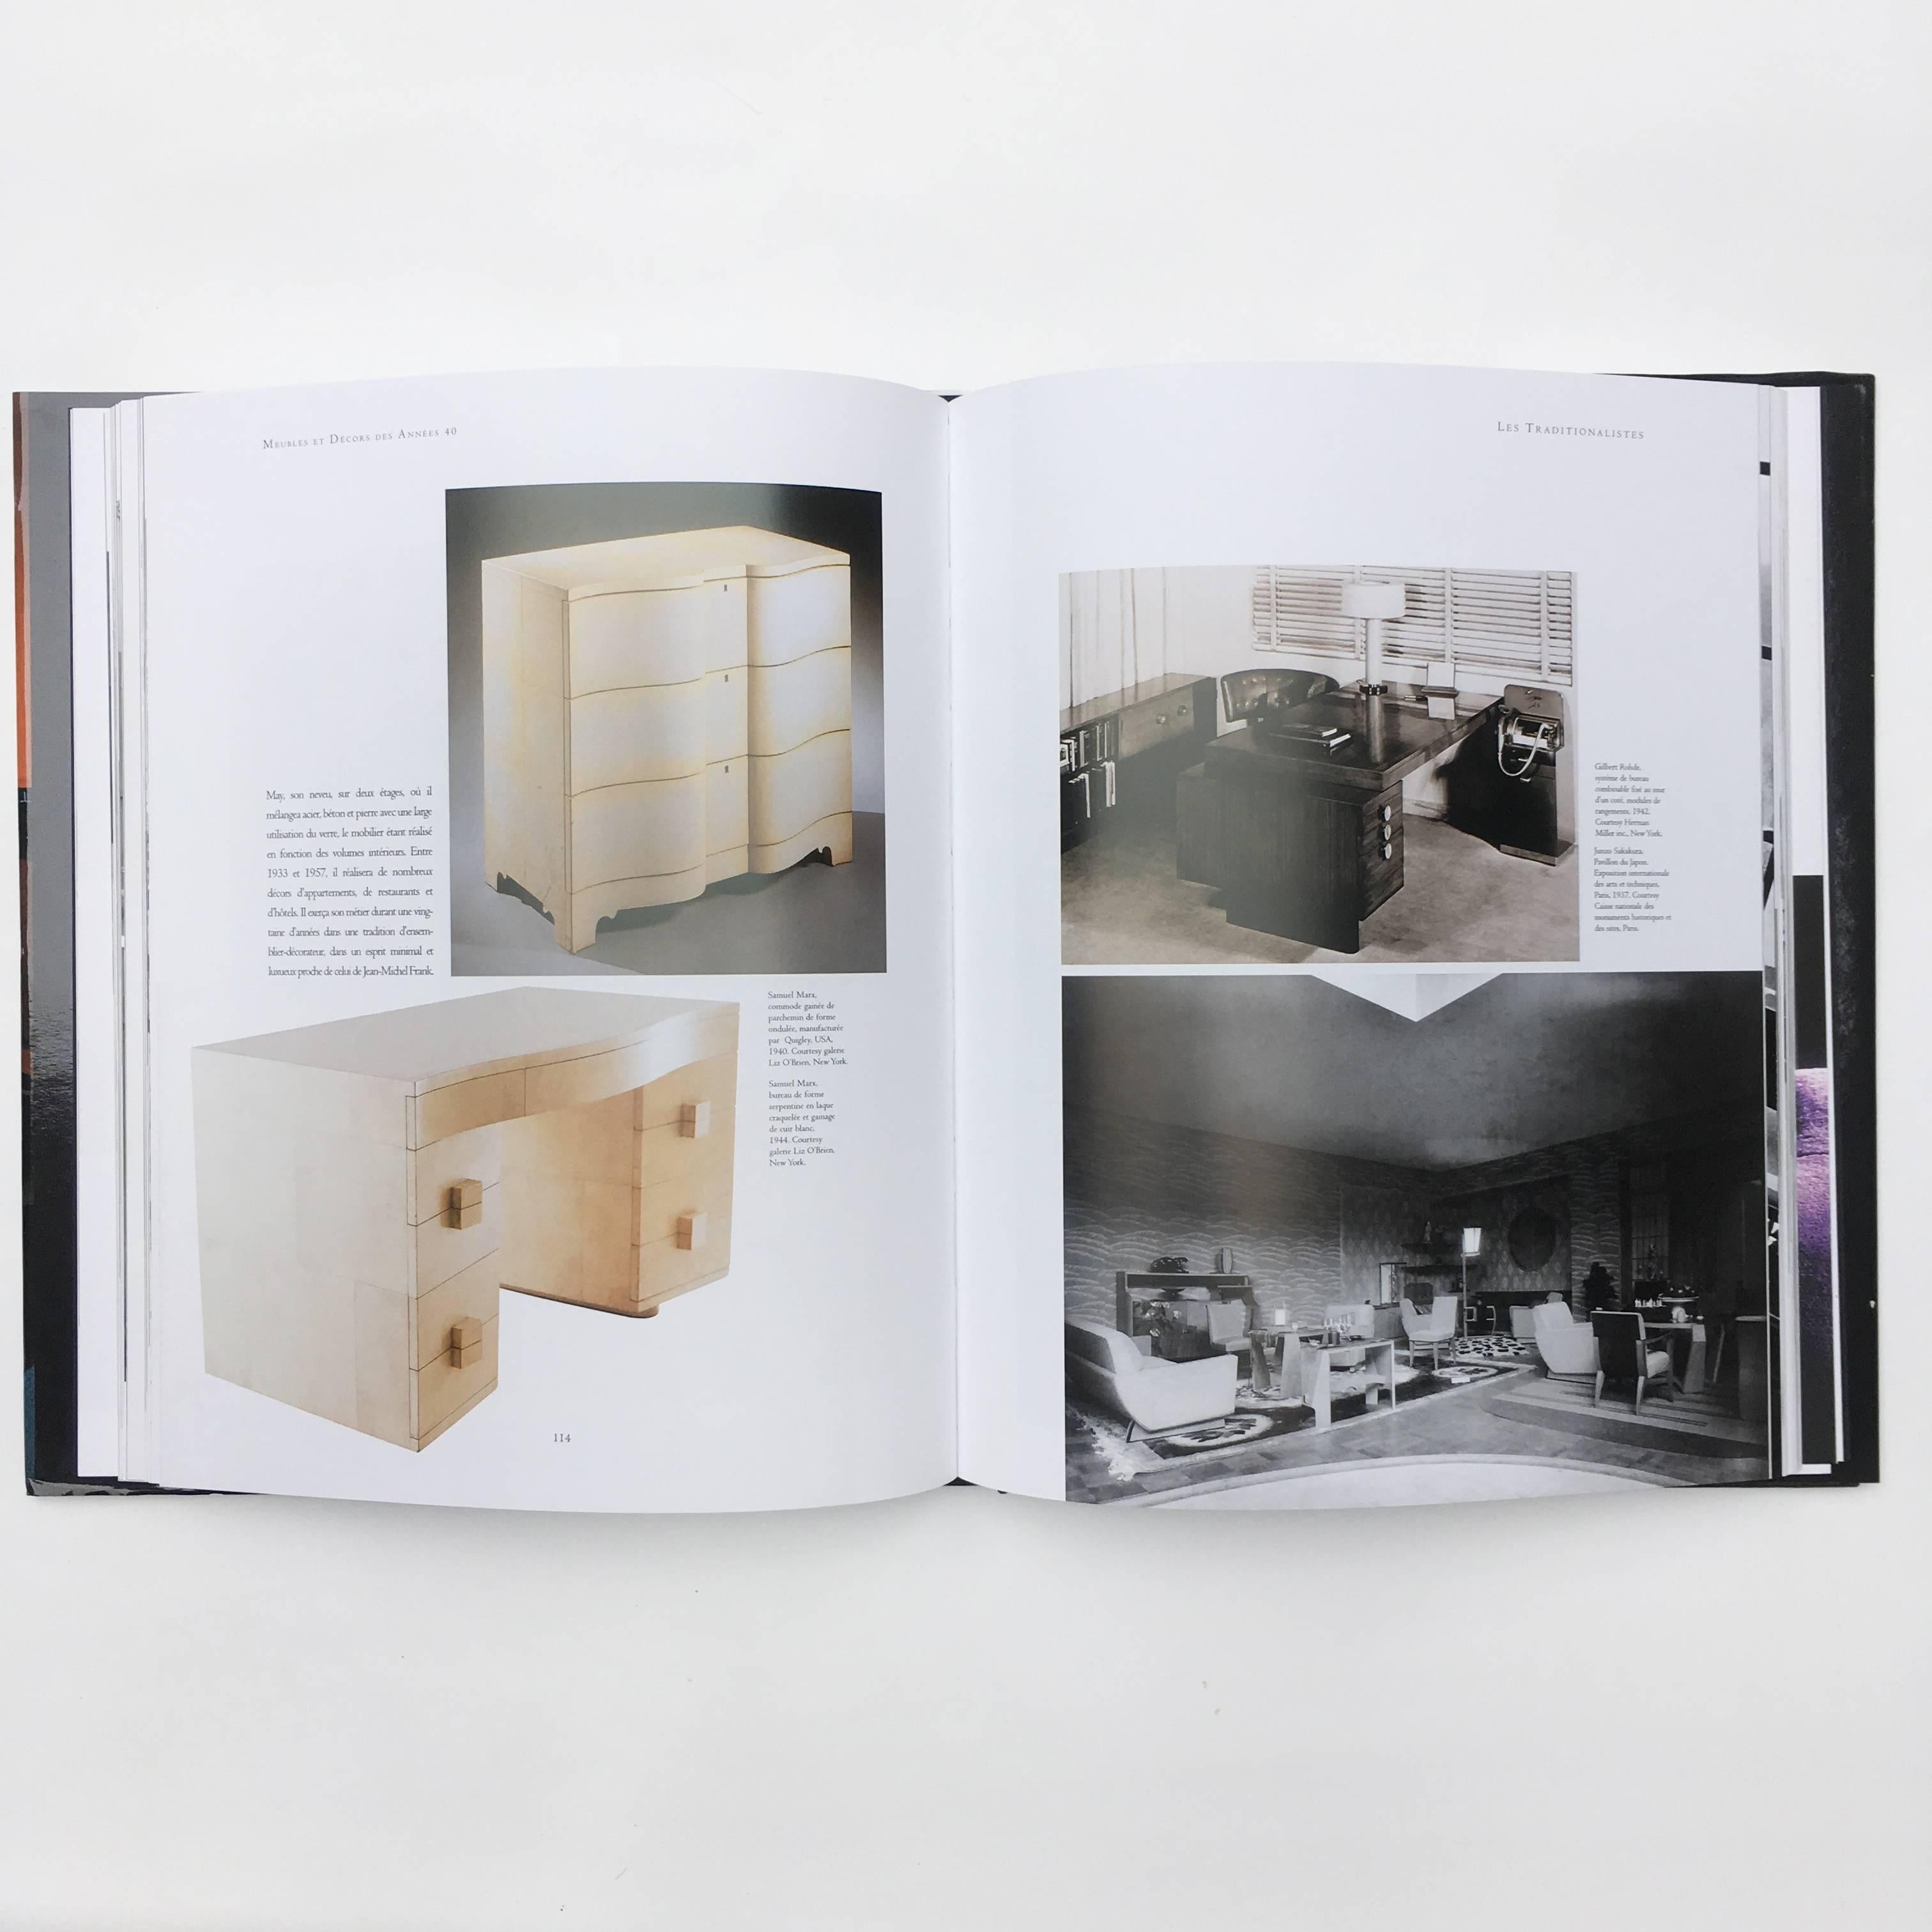 First edition, published by Editions du Regard, 2002

Text in French

A beautiful study of the furniture and interiors of the 1940s looking at the works of the great designers and cabinet makers from across Europe and America. The book gives the